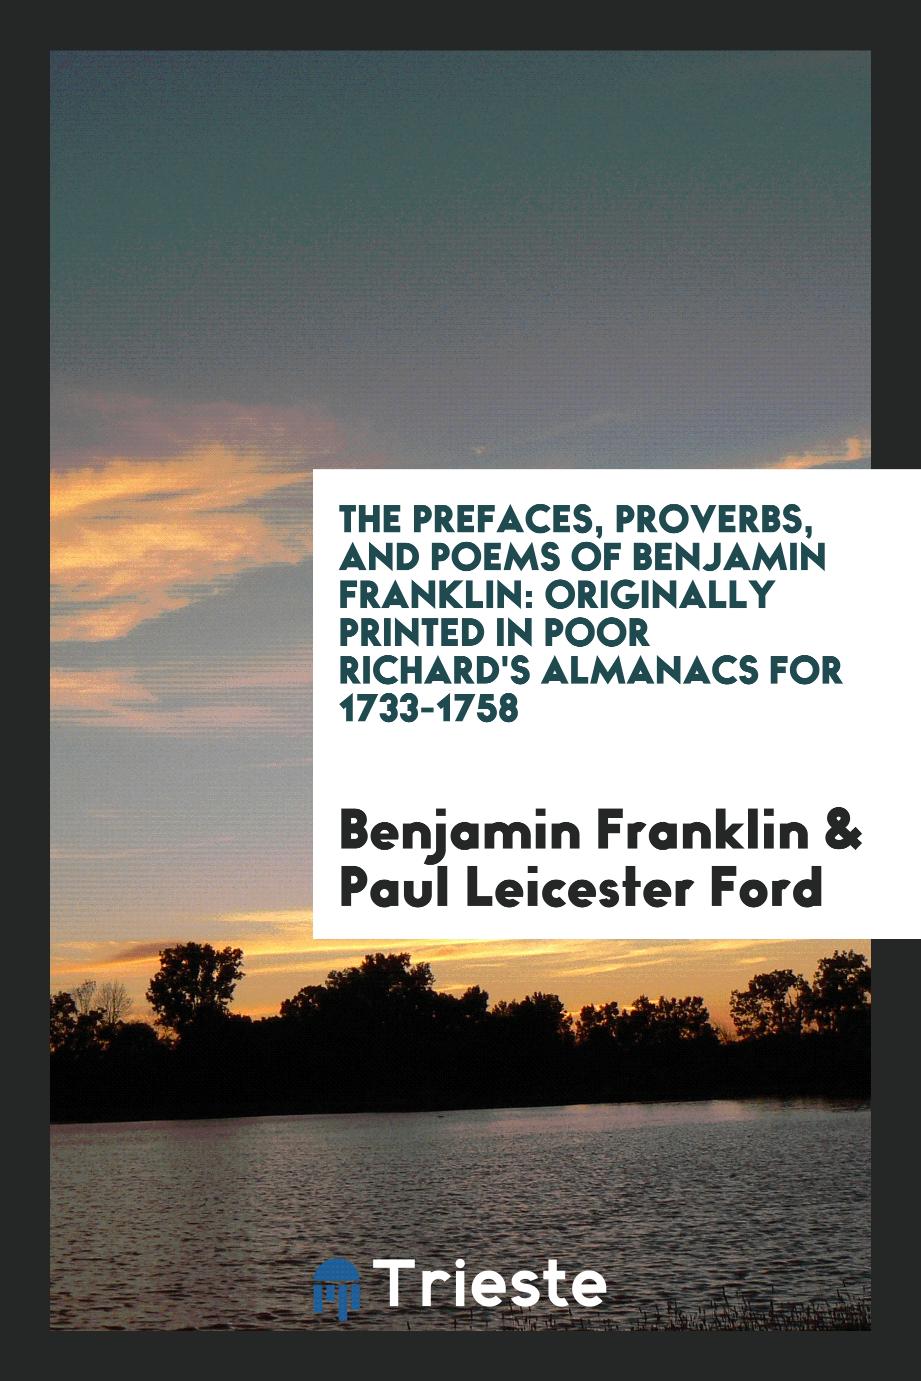 The Prefaces, Proverbs, and Poems of Benjamin Franklin: Originally Printed in Poor Richard's Almanacs for 1733-1758